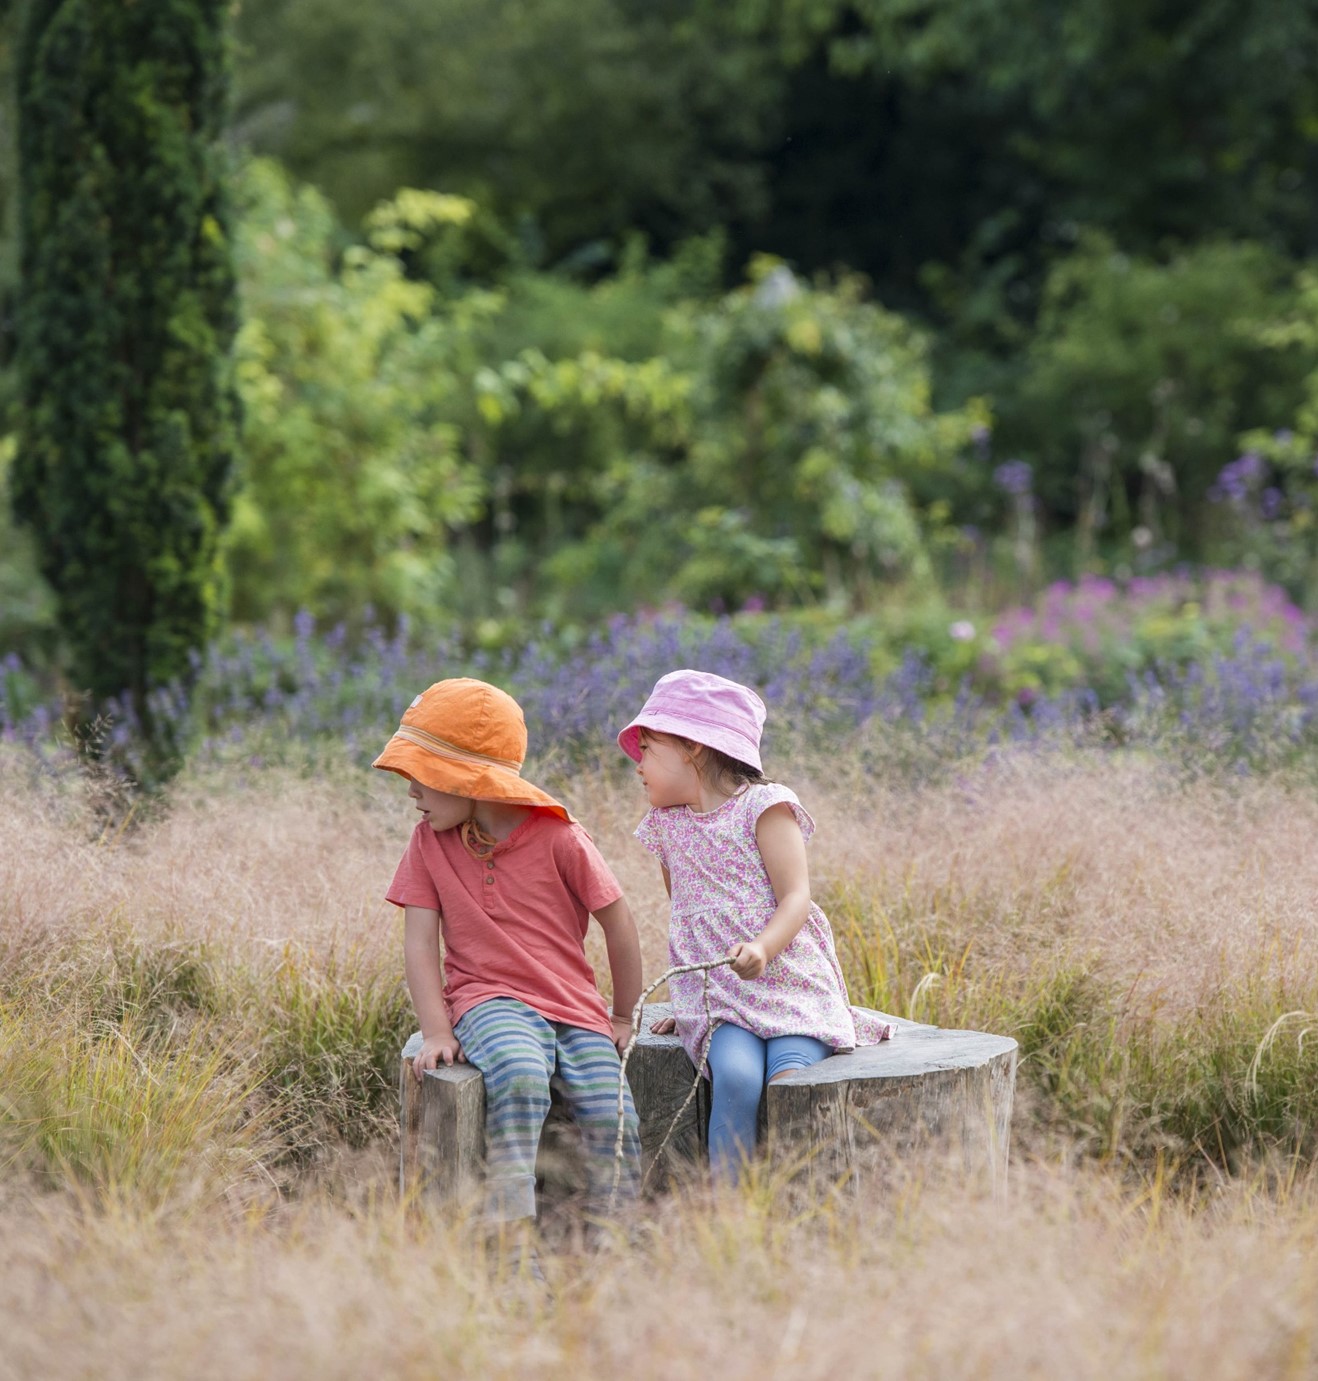 Family friendly activities for £10 or less in Cambridge this summer